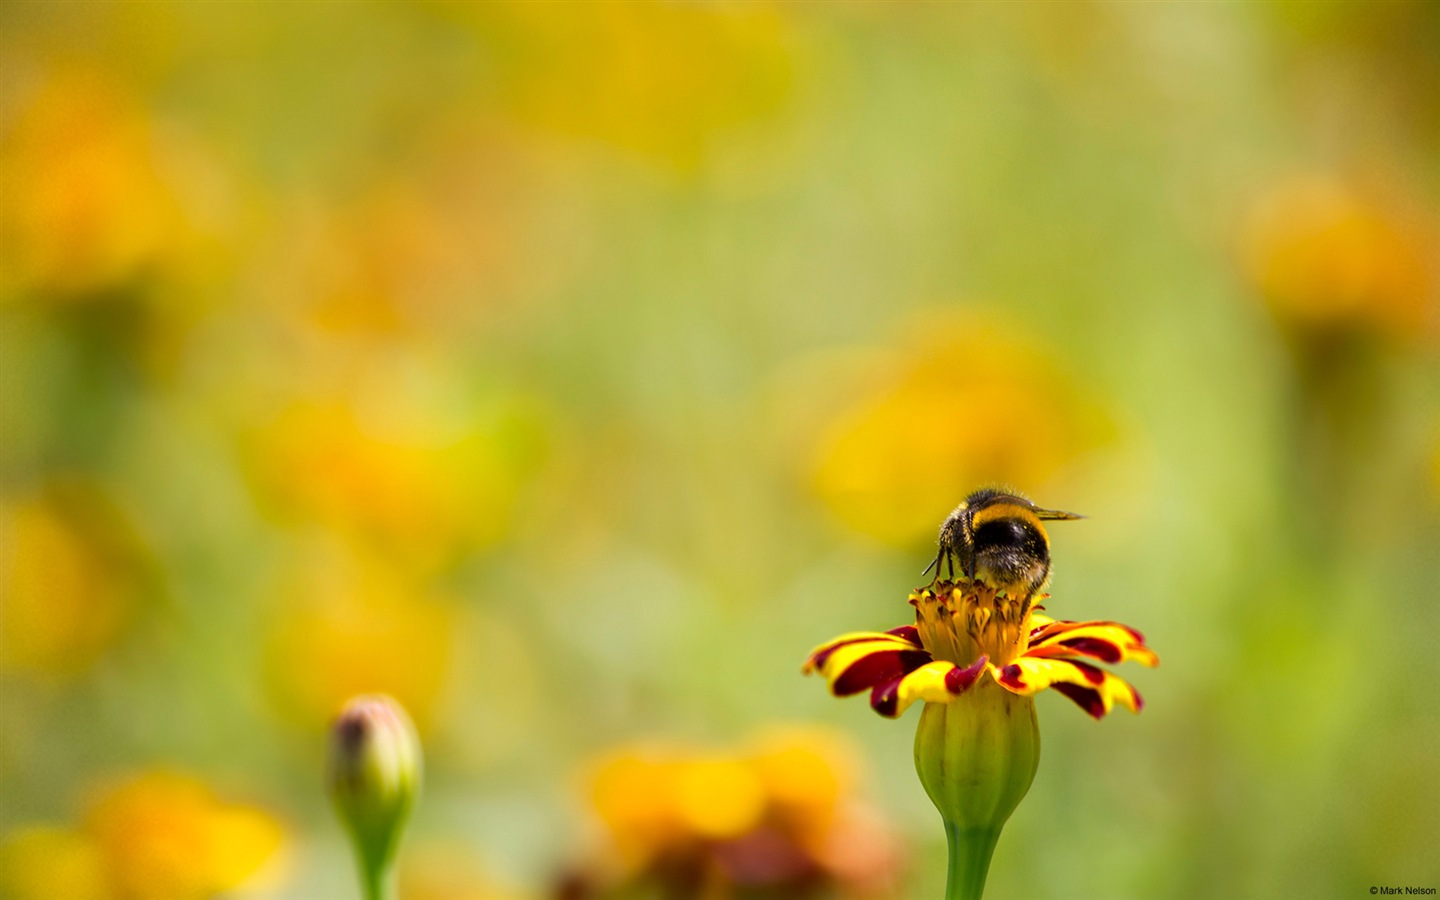 Windows 8 theme wallpaper, insects world #10 - 1440x900